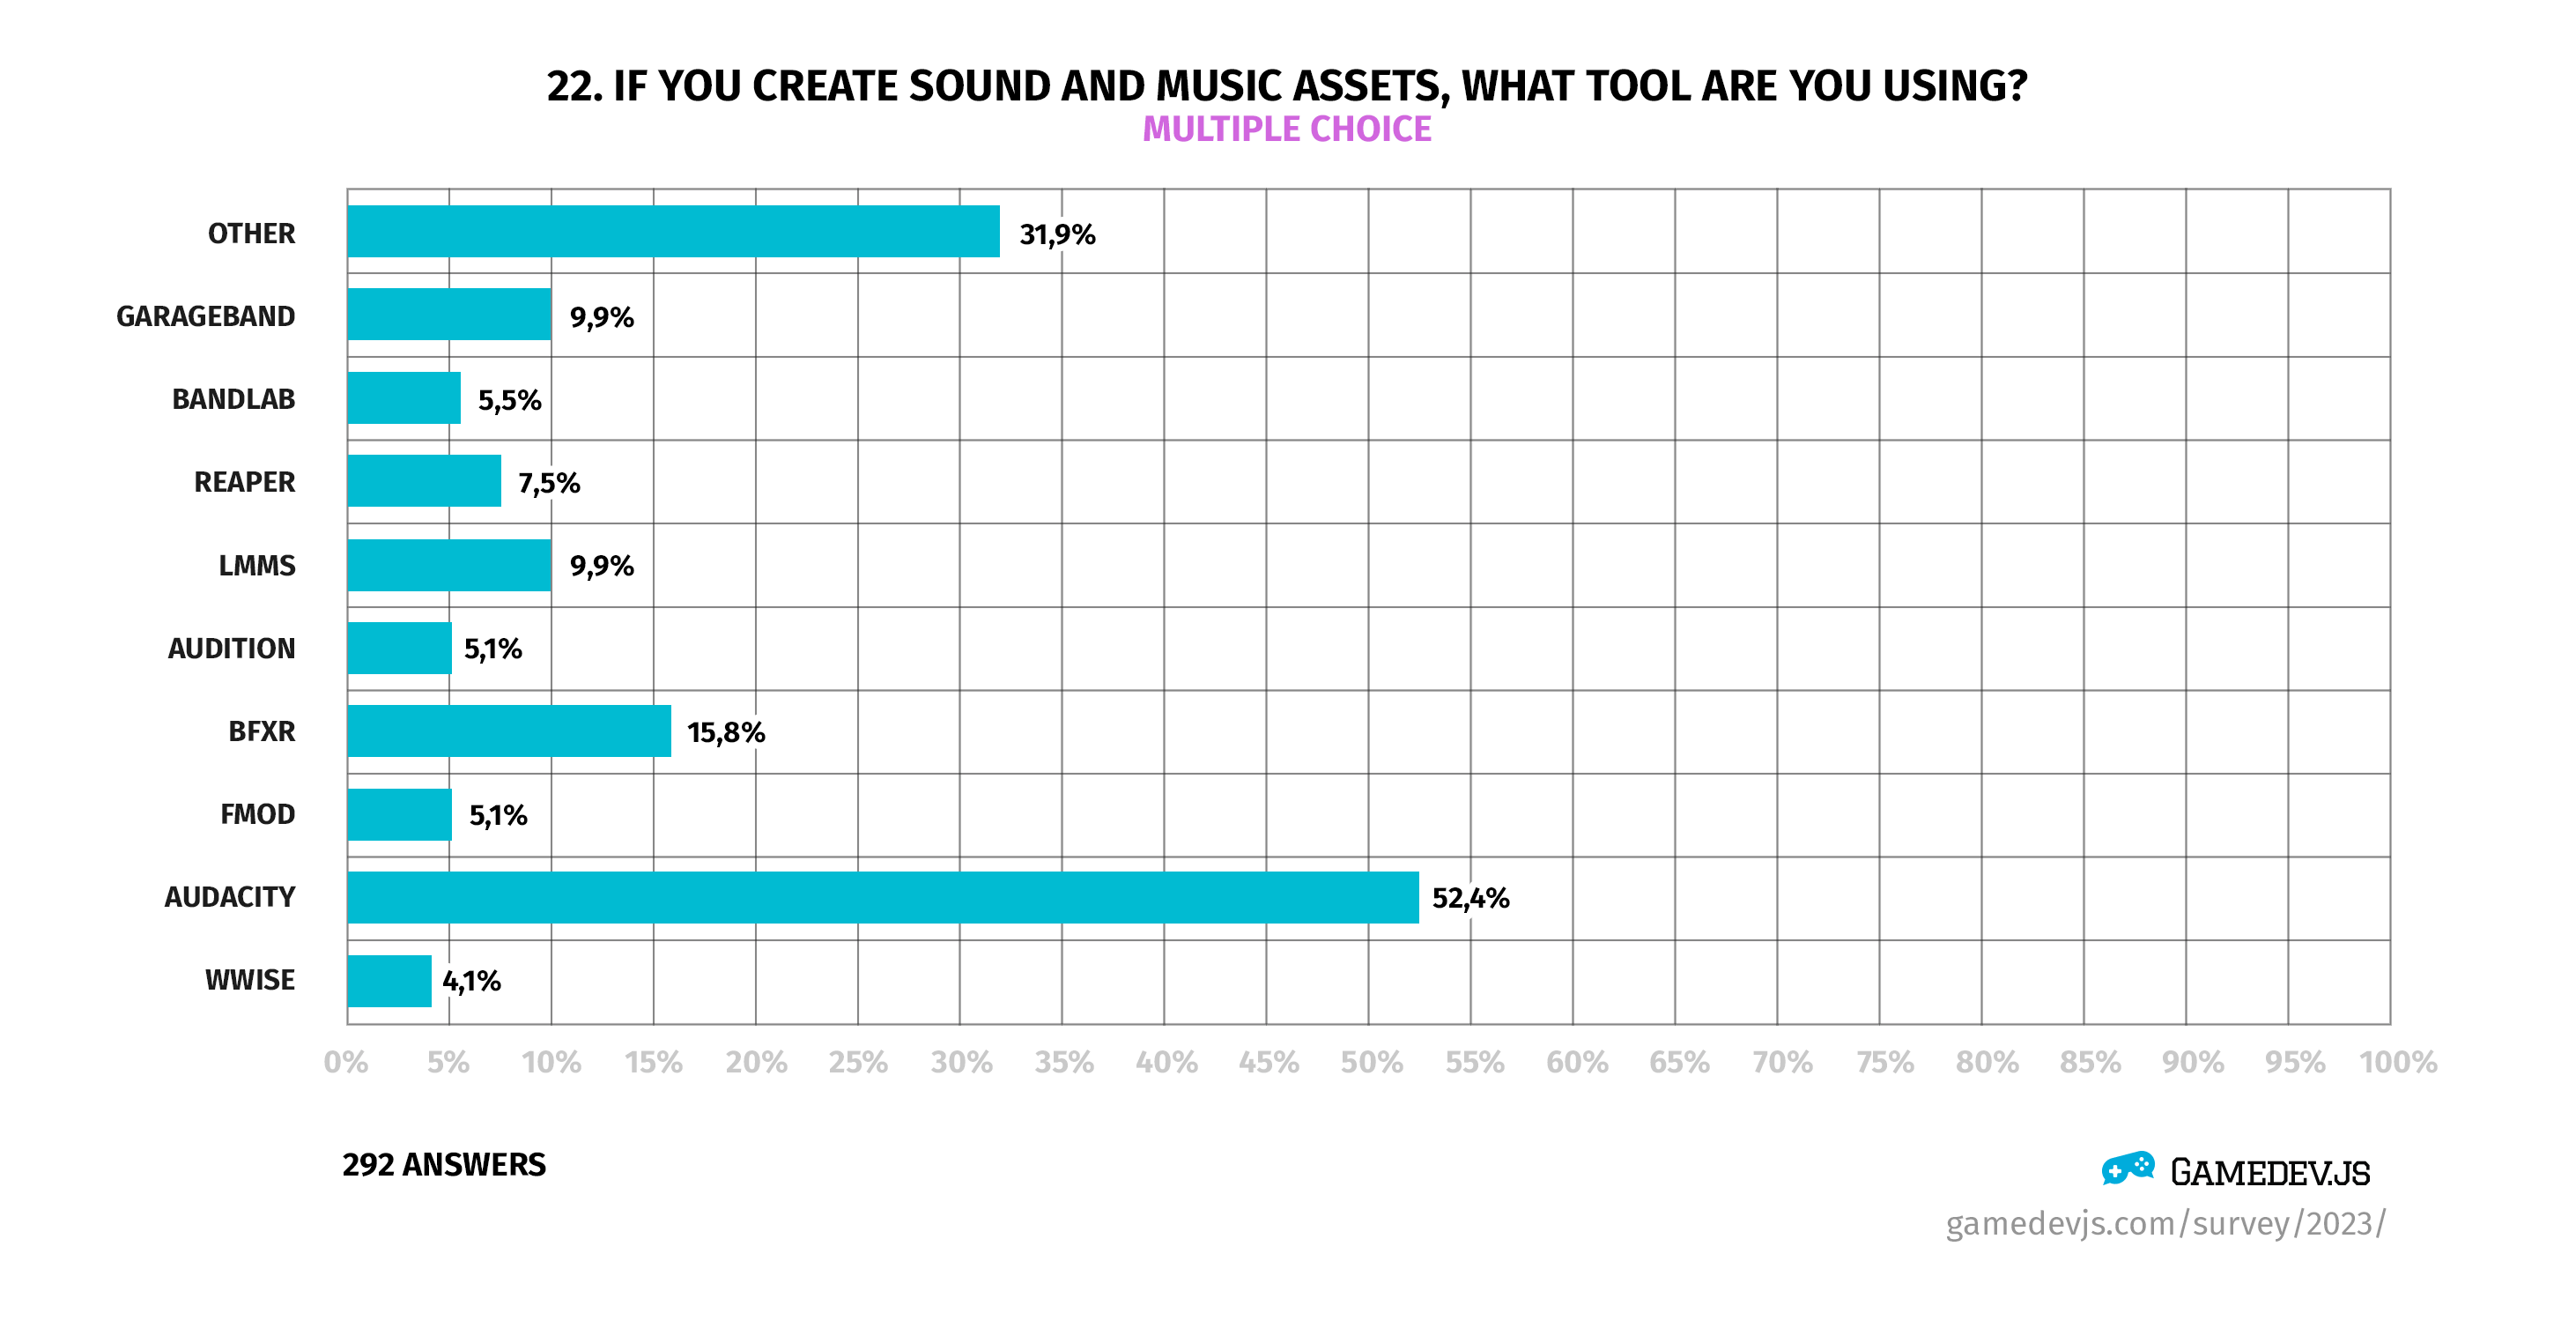 Gamedev.js Survey 2023 - Question #22: If you create sound and music assets, what tool are you using?